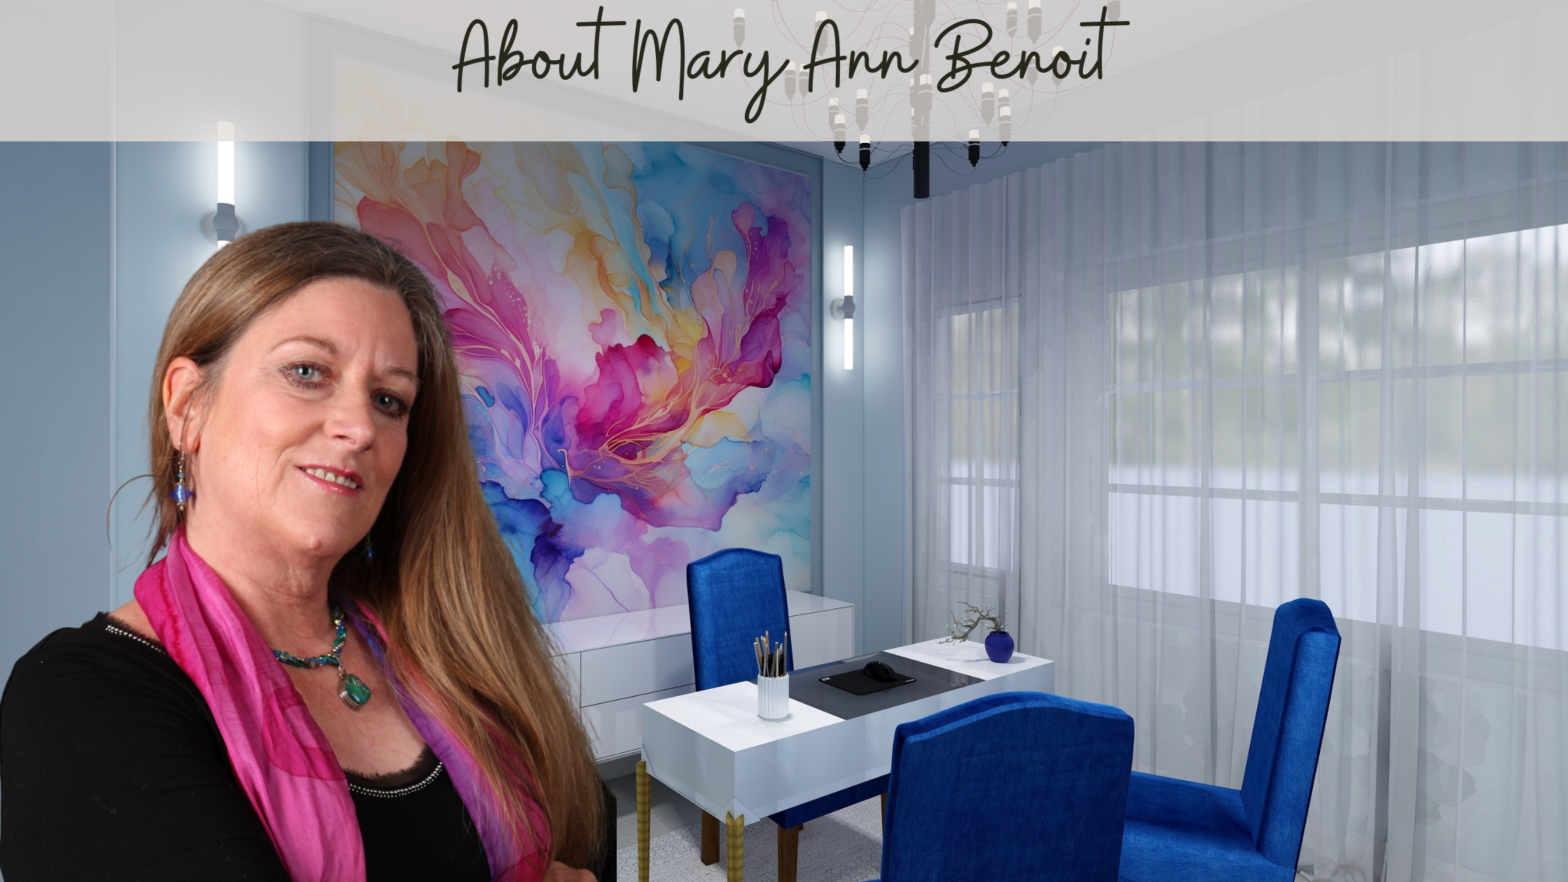 About Me- Mary Ann Benoit of Northern Lights Home Staging and Design